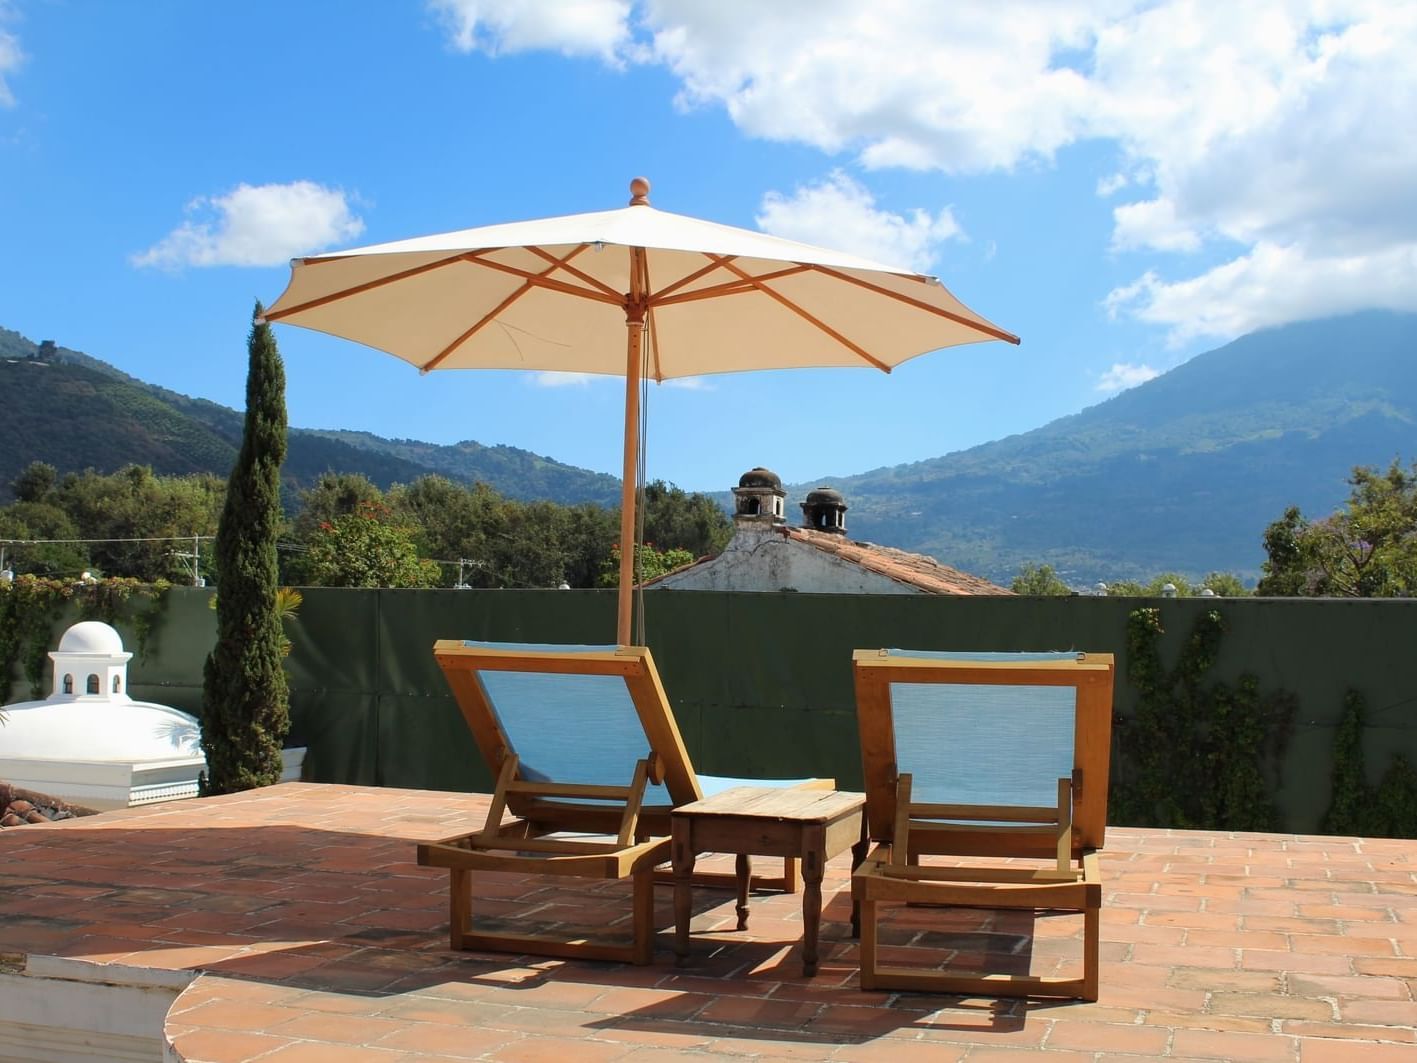 Rooftop lounge area overlooking the mountains & blue sky at Pensativo House Hotel